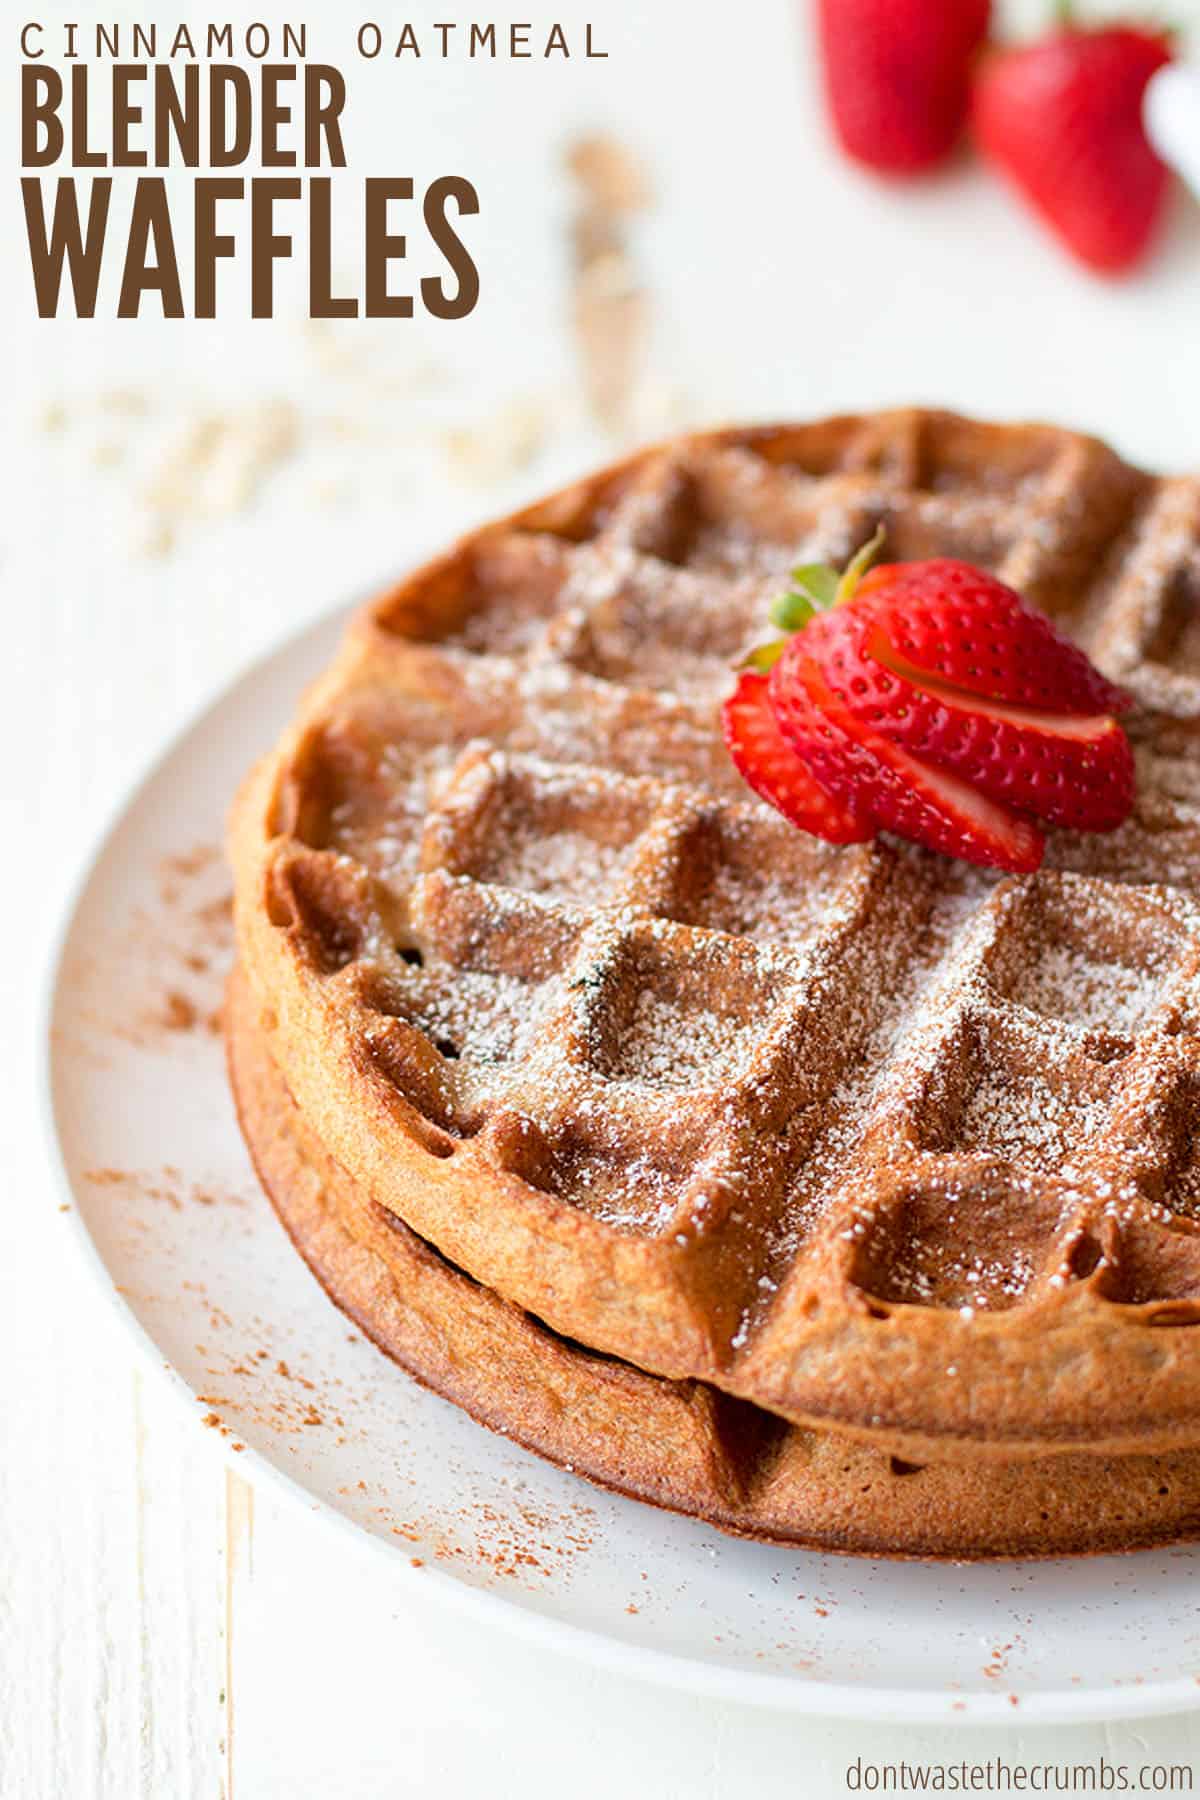 Two golden brown waffles stacked on top of a white plate. The waffles are dusted with powdered sugar and sliced strawberries. The text overlay reads "Cinnamon Oatmeal Blender Waffles."